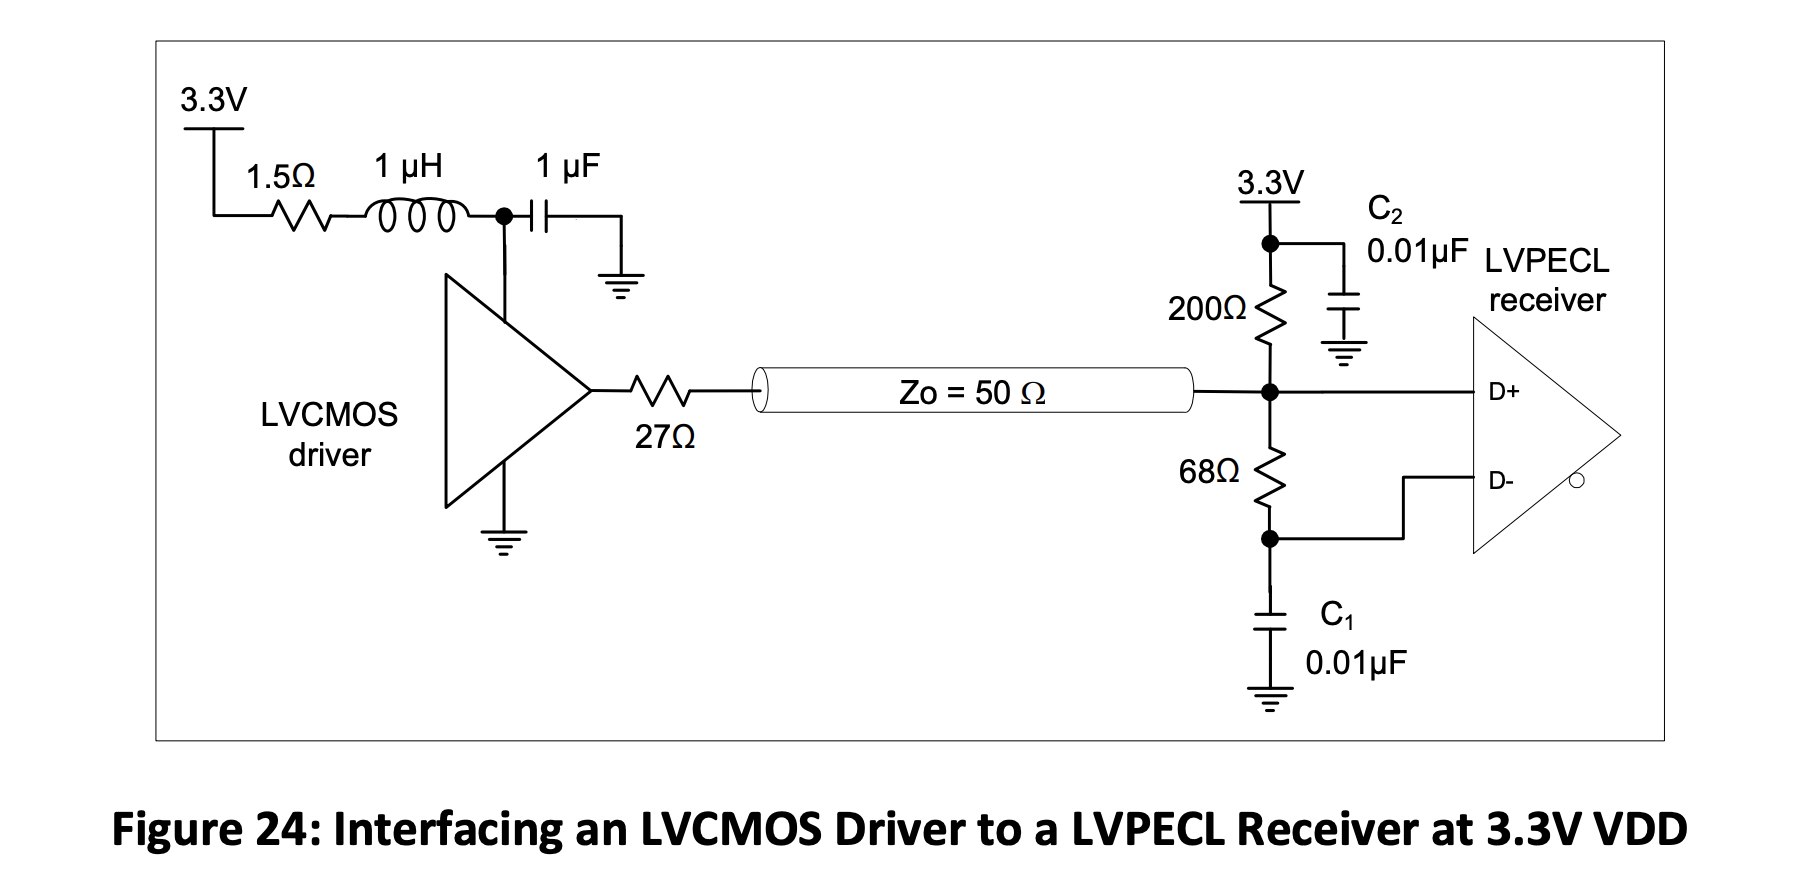 Figure 24 Interfacing an LVCMOS Driver to a LVPECL Receiver at 3.3V VDD